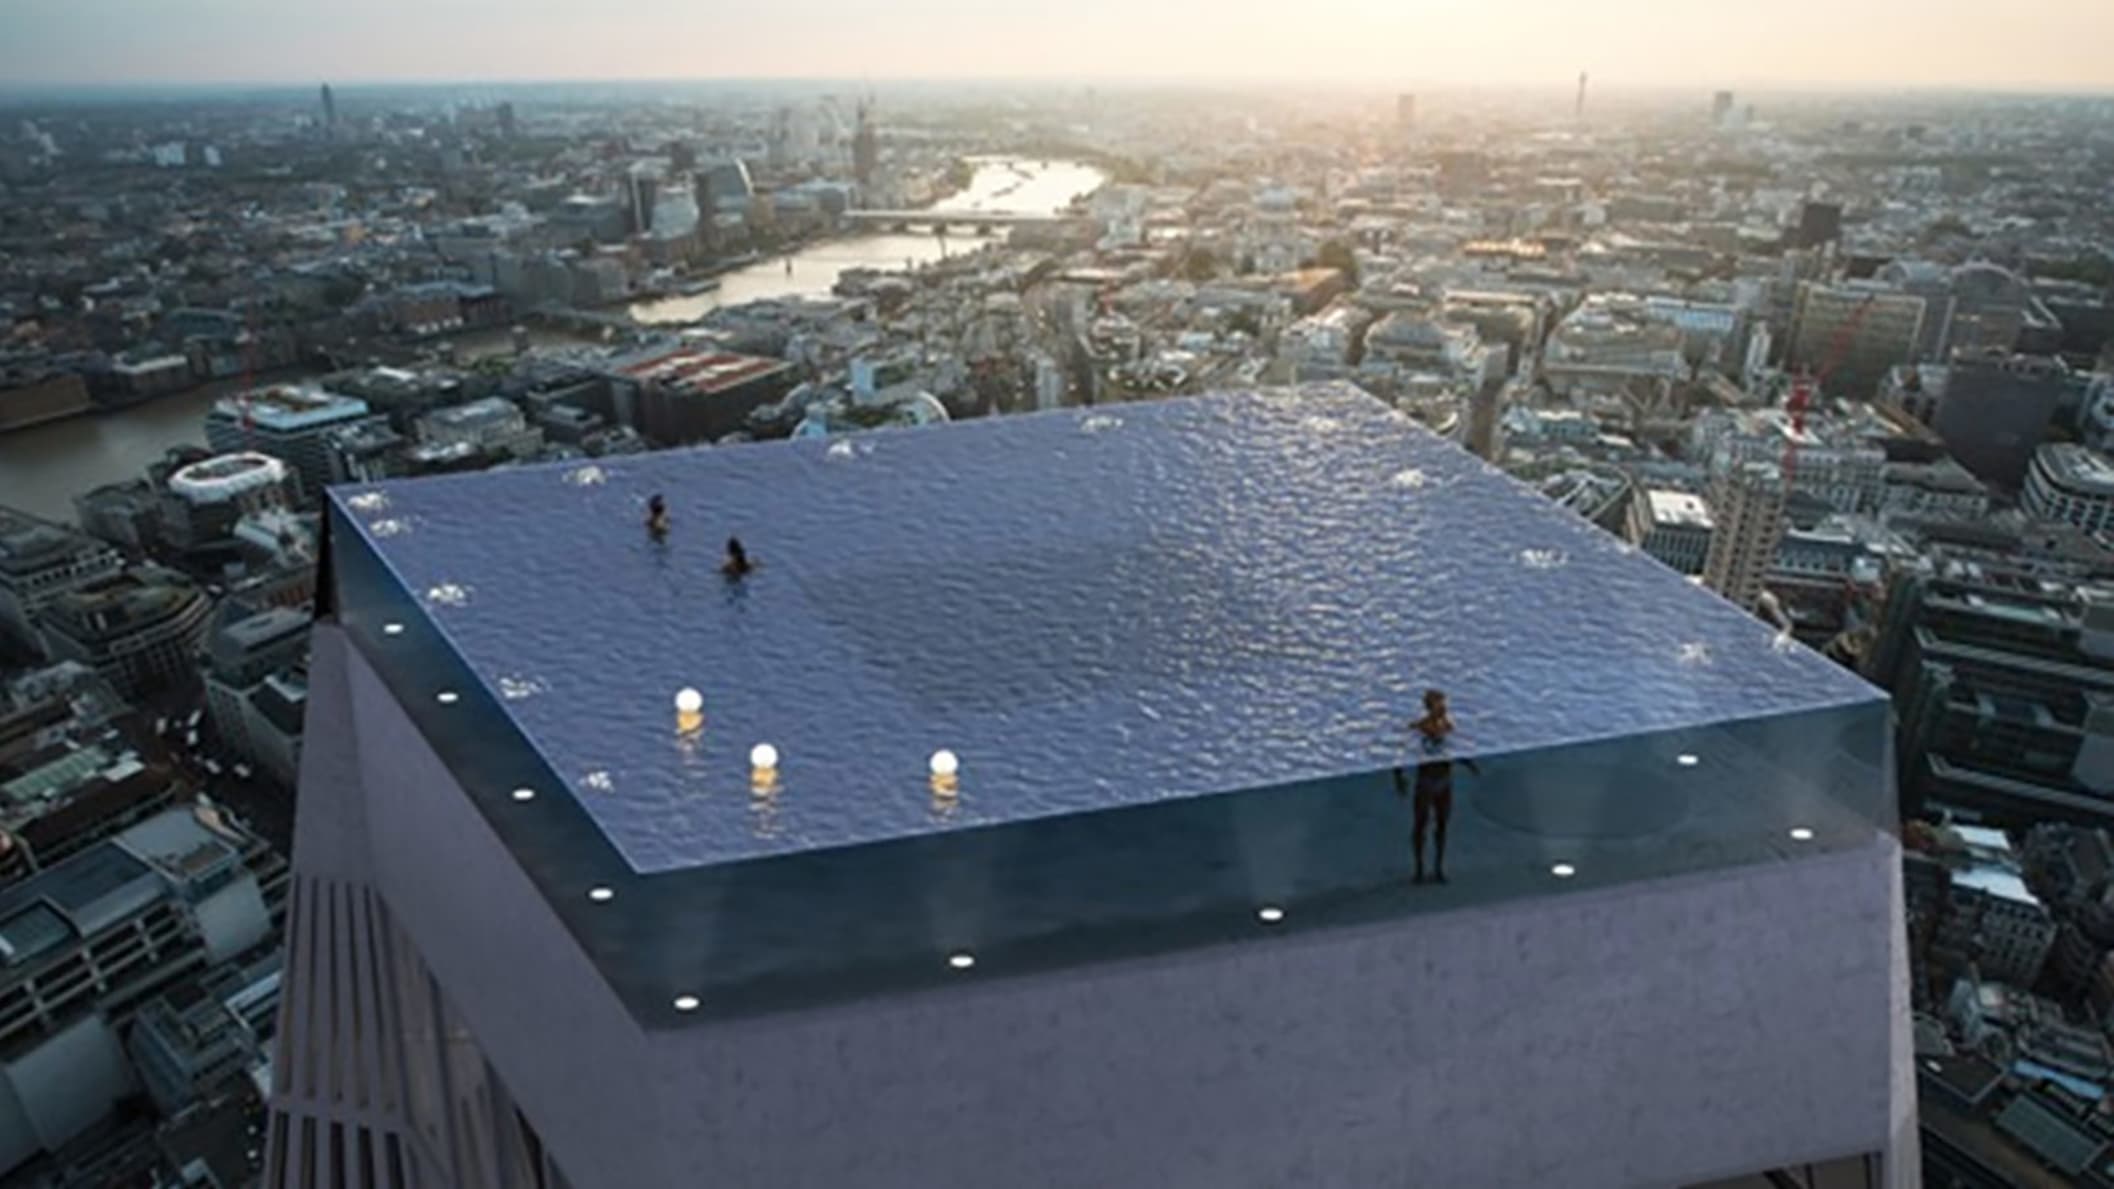 New designs have been unveiled for an infinity pool that would sit on top of a 55 storey skyscraper, with 360-degree views of London's skyline. 